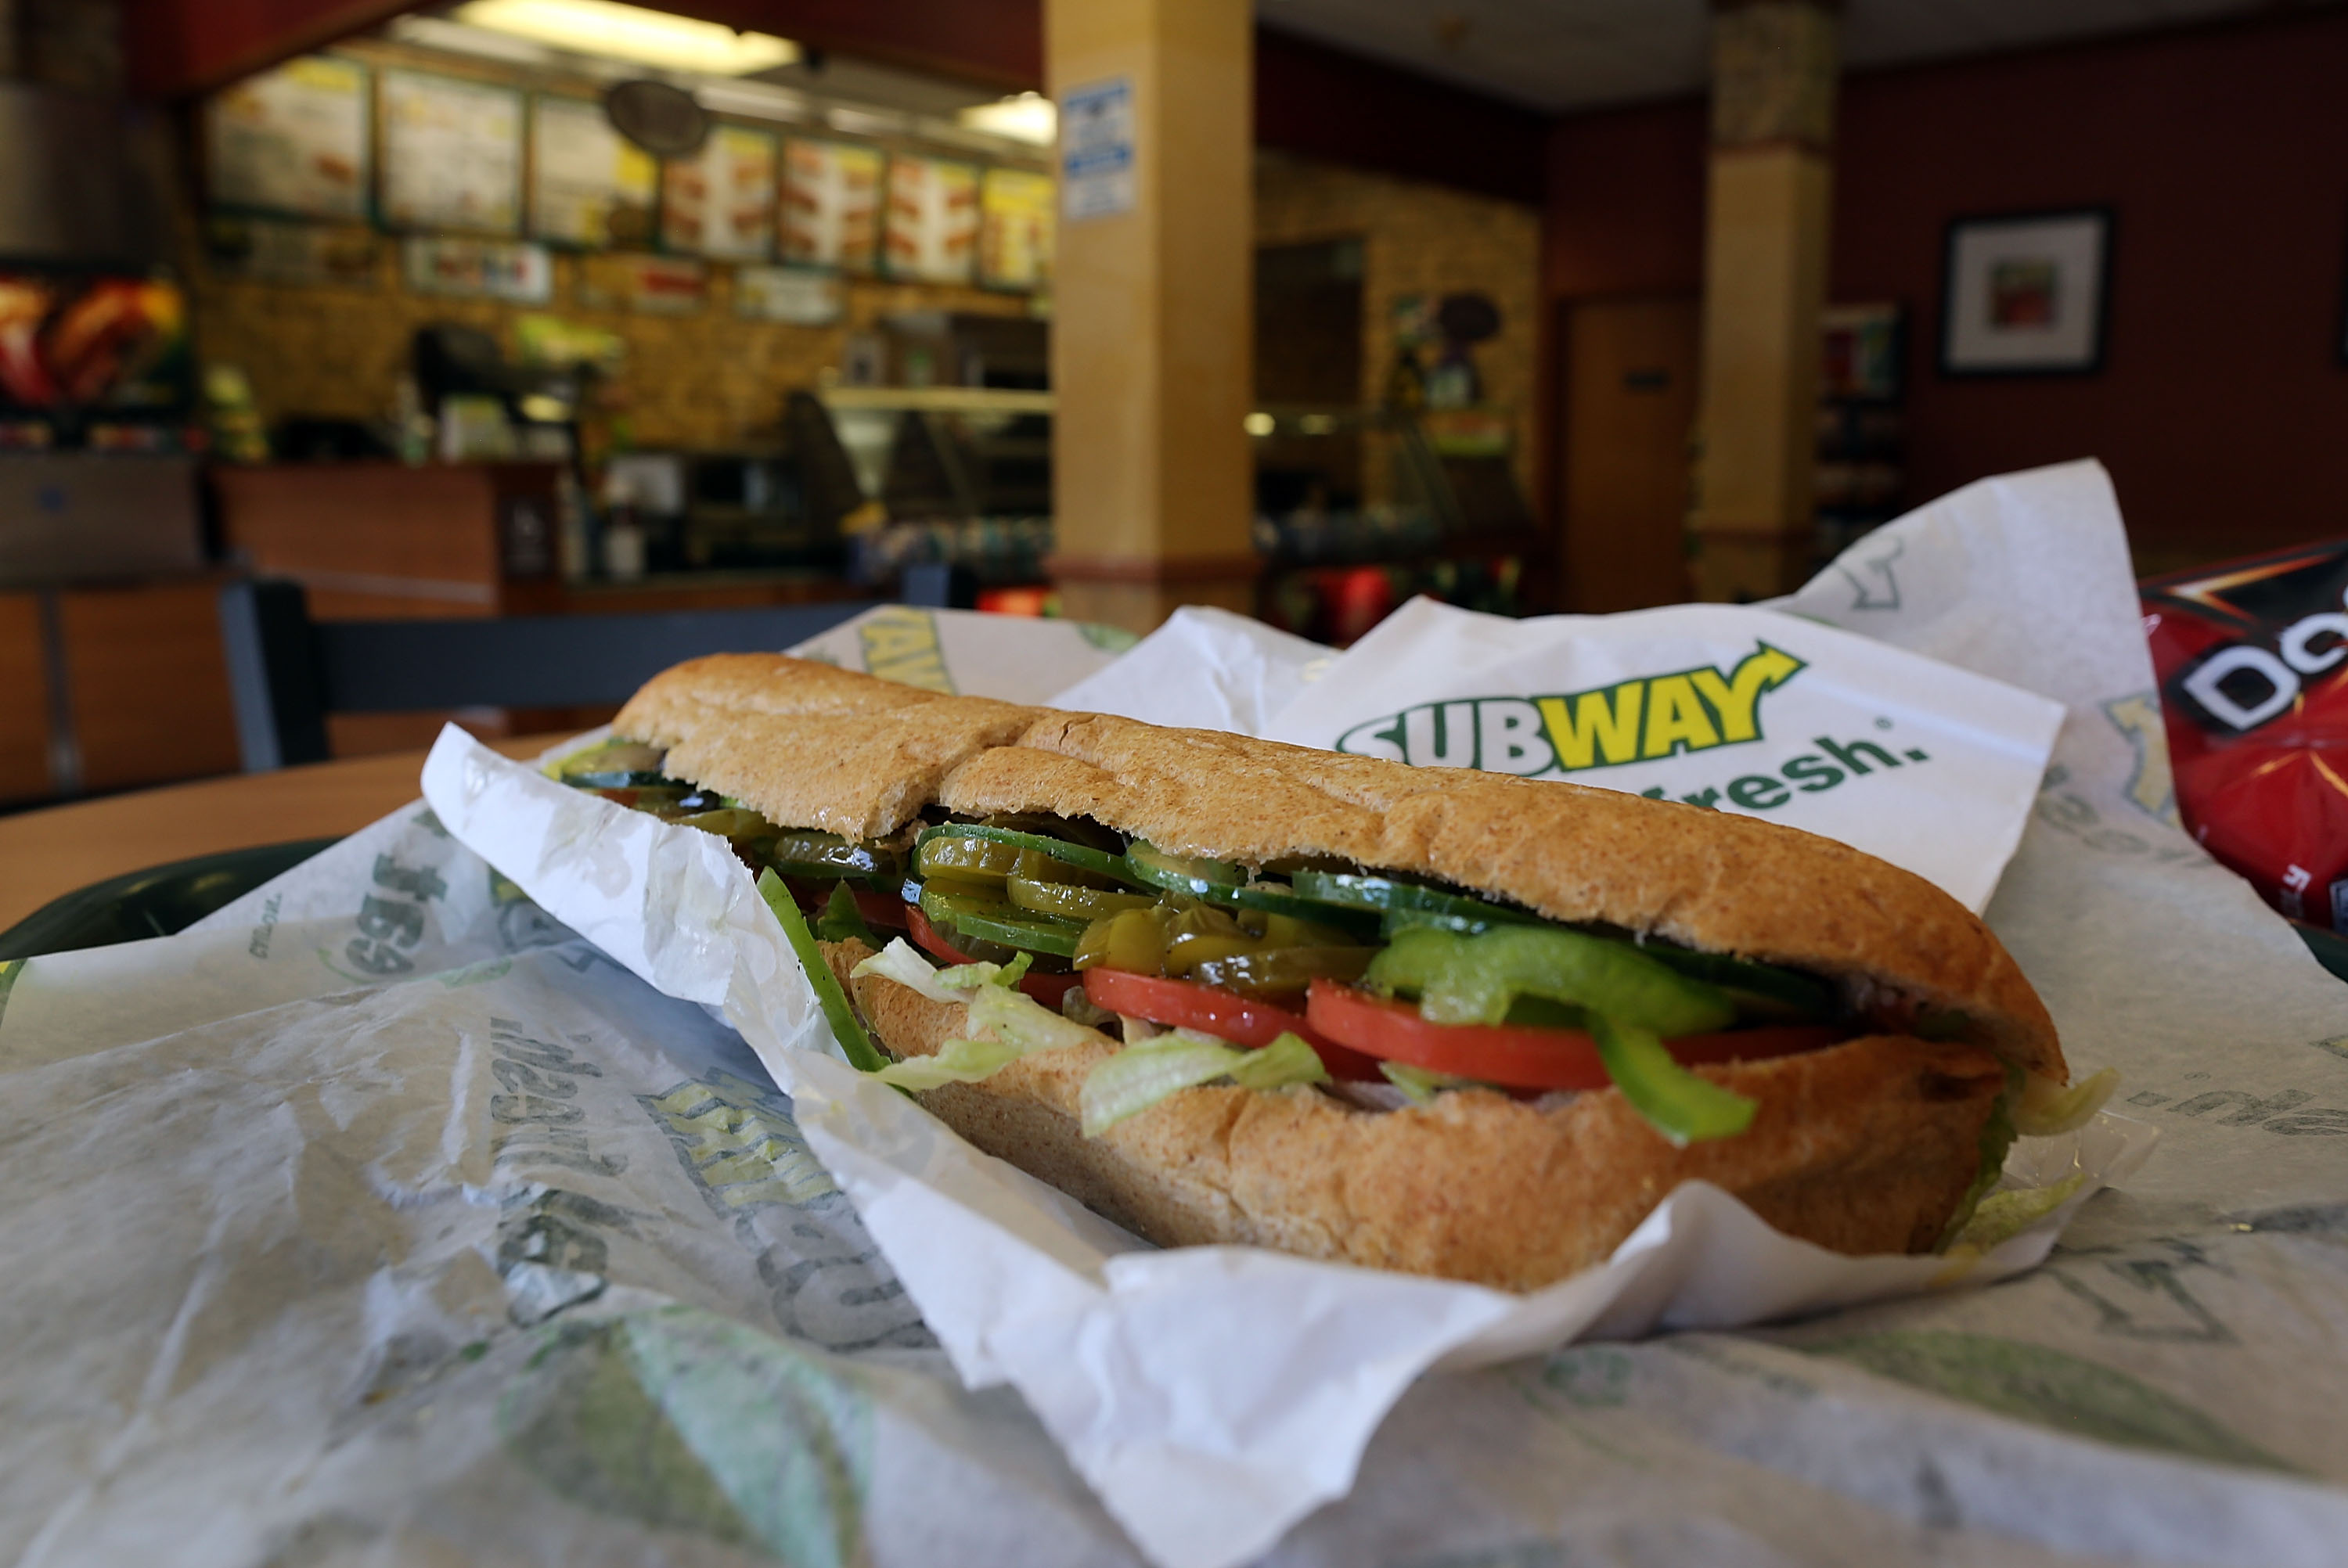 How to Get a Subway Sandwich for Free: Everything to Know